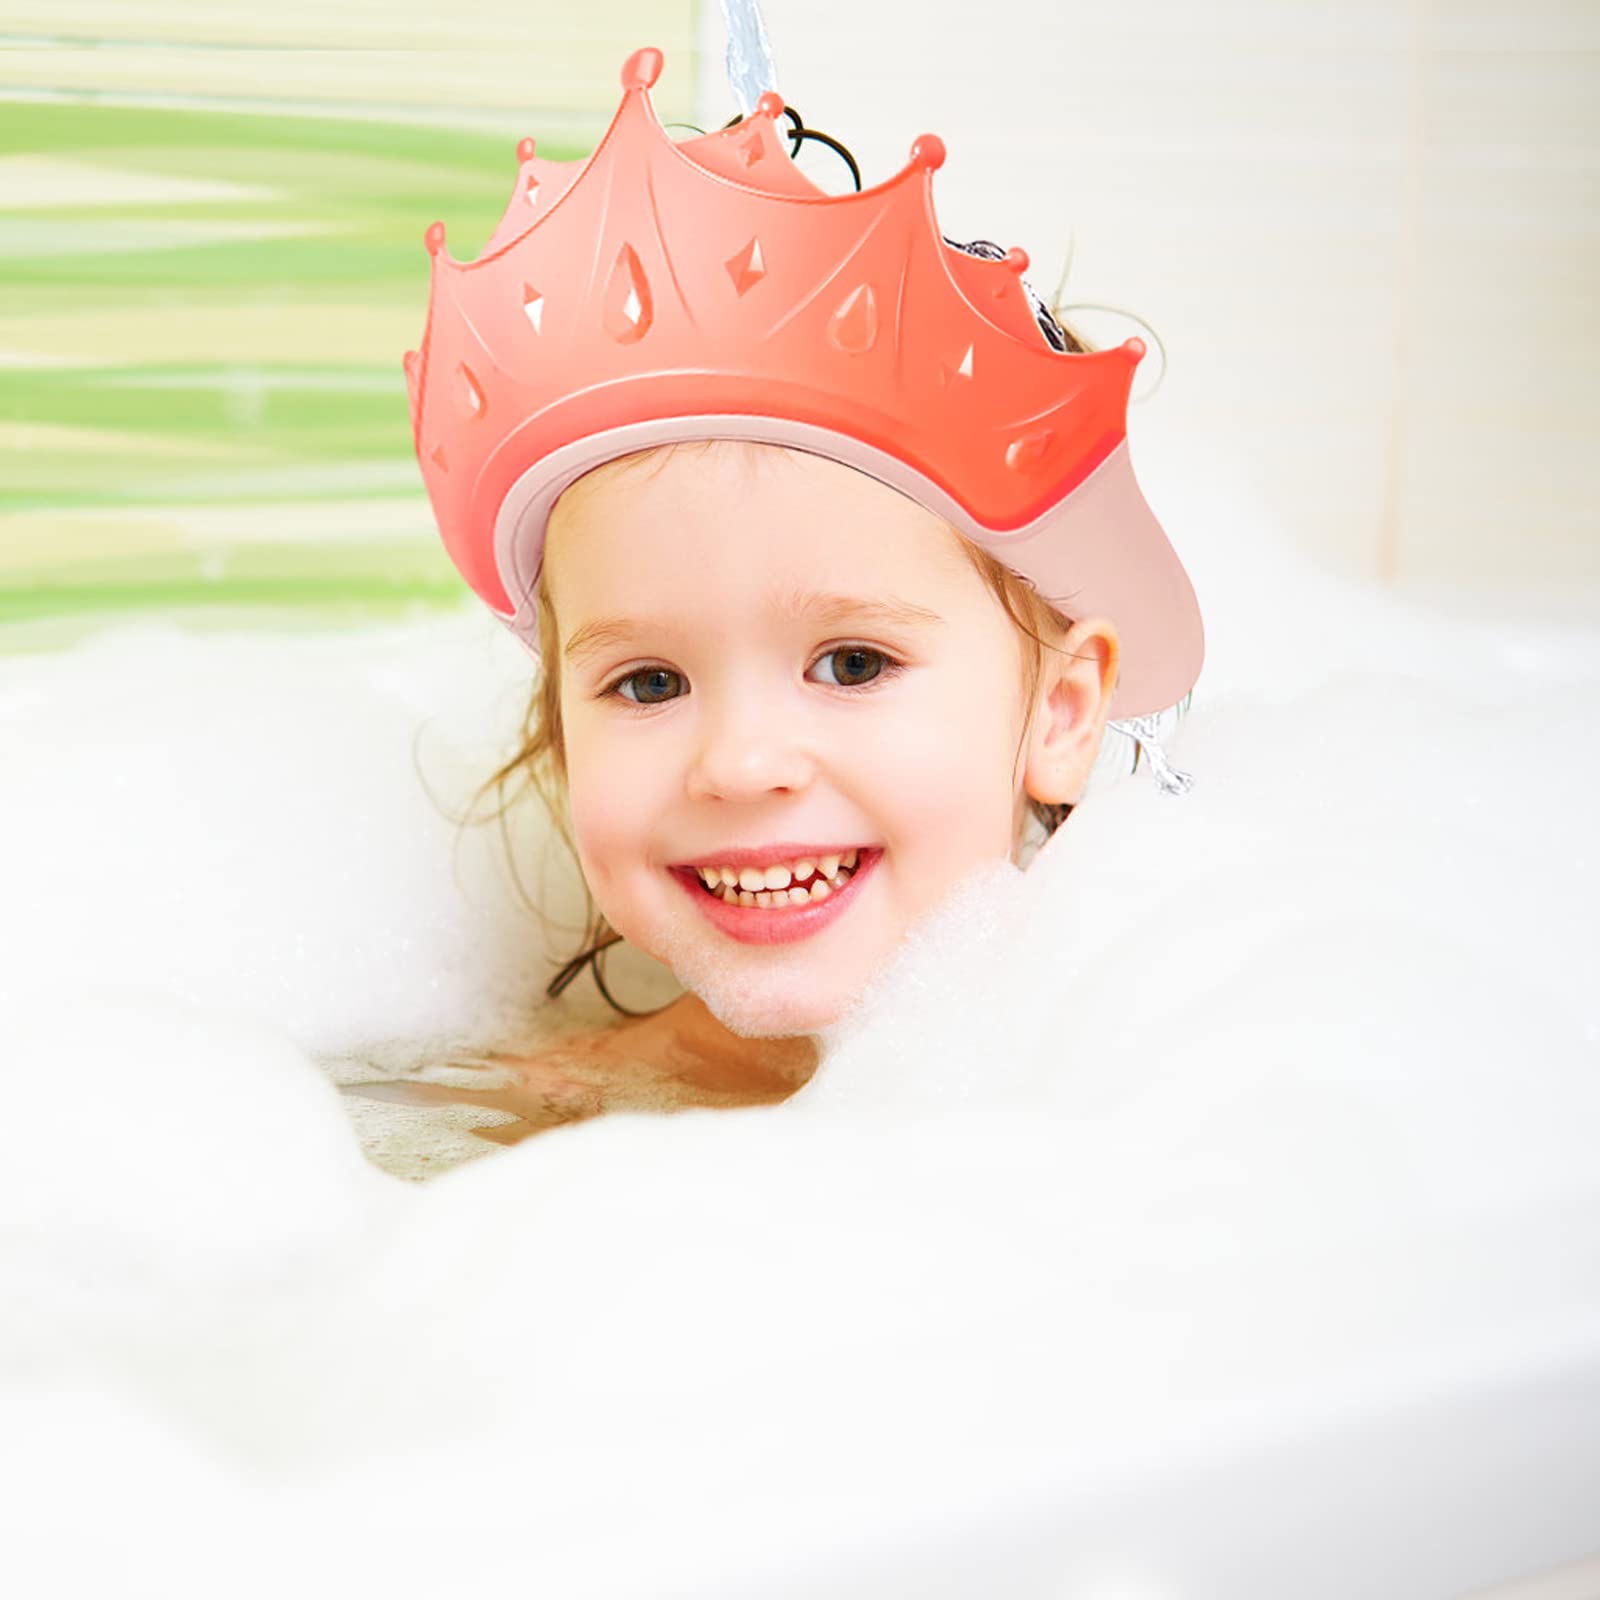 Kids Baby Shower Caps Adjustable Baby Bath Visor Hats Crown Hair Washing Hats for Toddlers to Stop Water in Eyes Pink